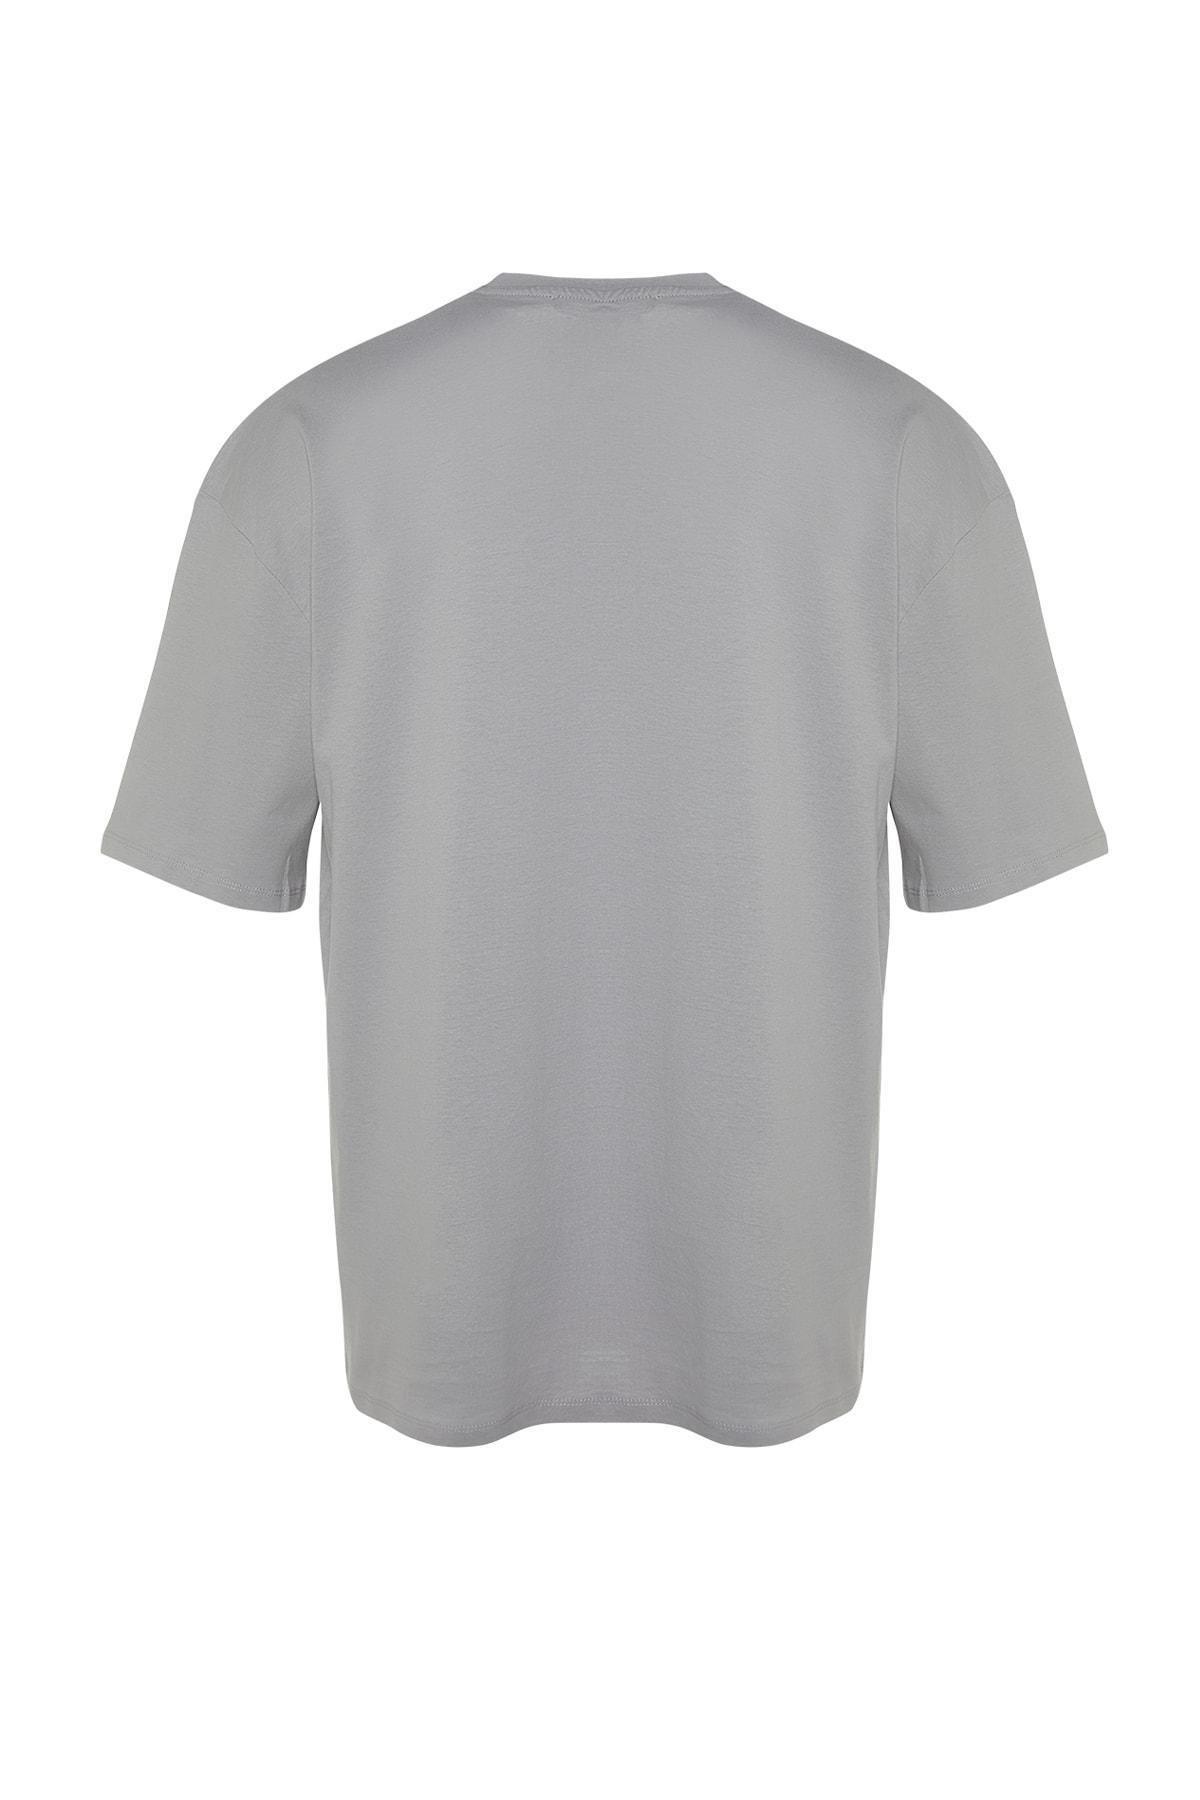 Trendyol - Grey Printed Relaxed T-Shirt